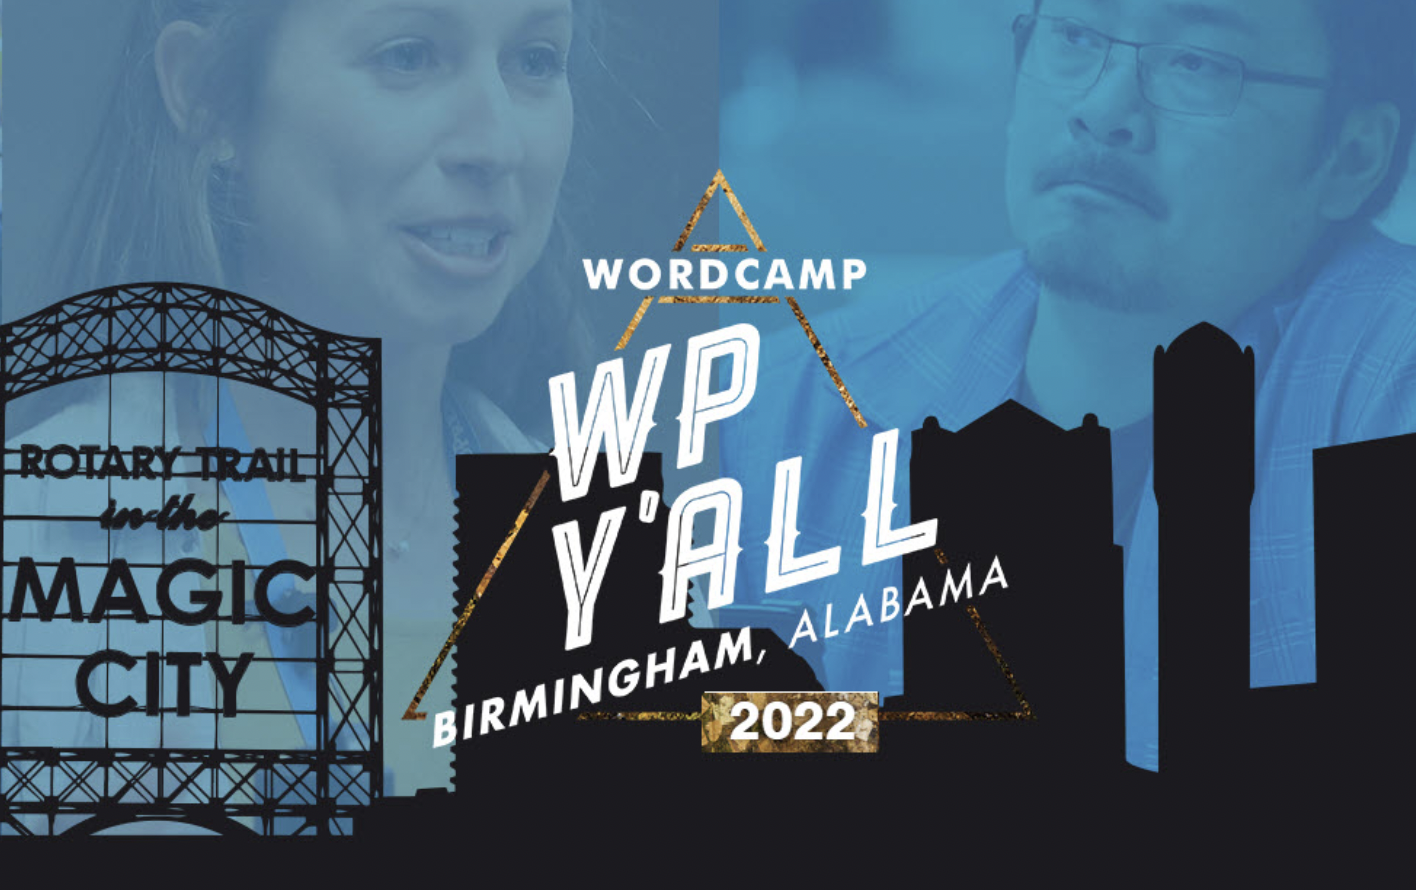 Birmingham to Host First In-Person WordCamp, February 4-5, 2022